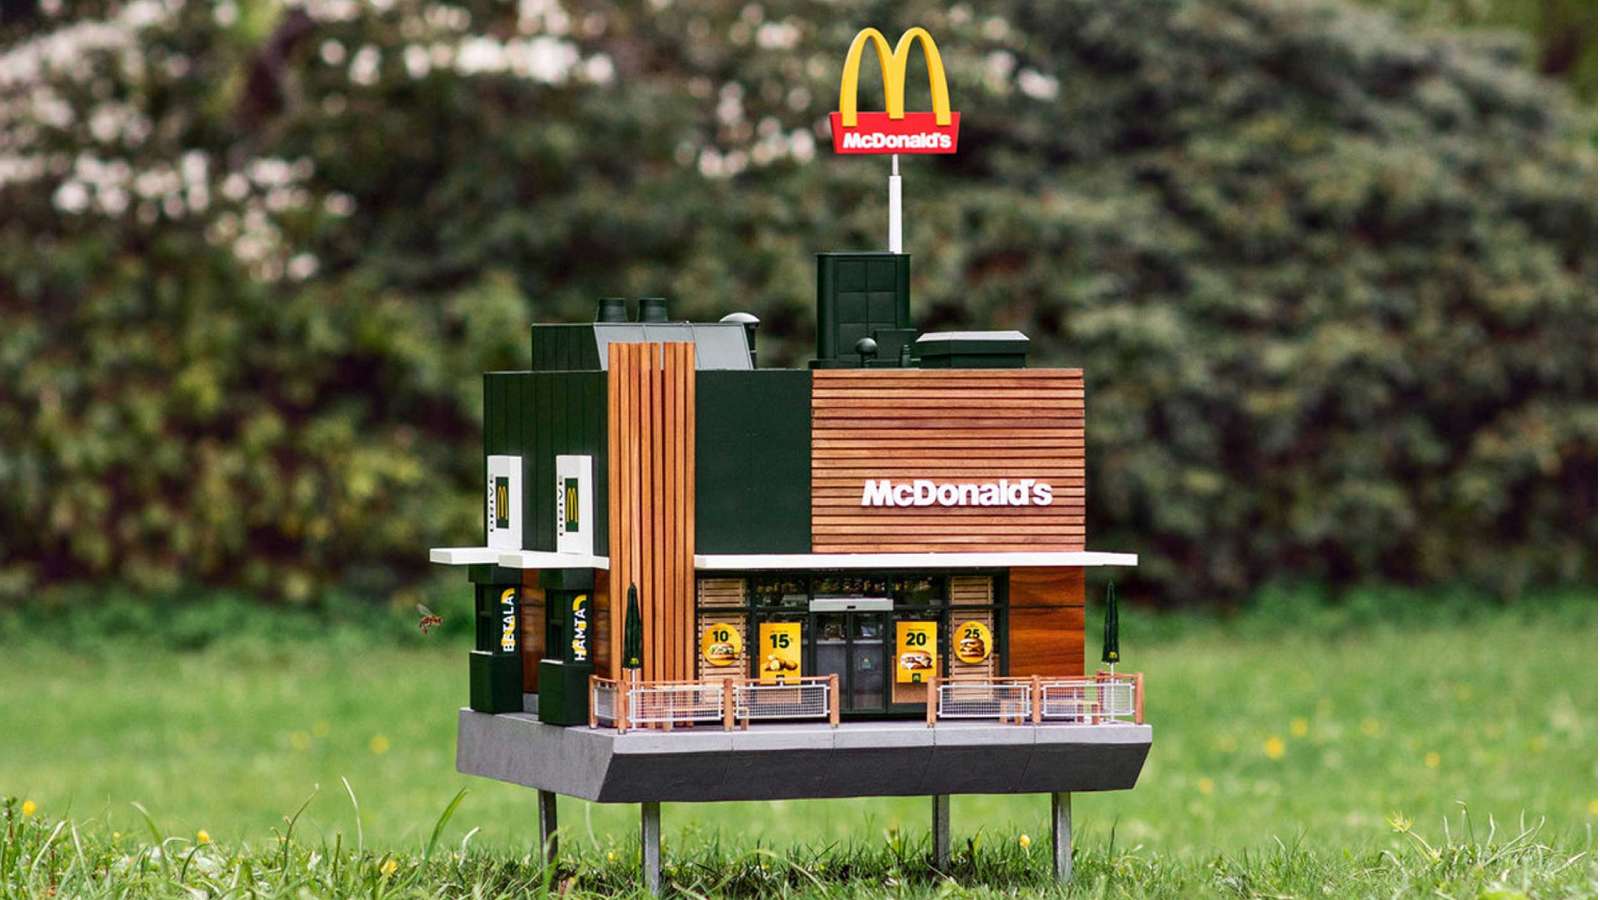 The world’s smallest McDonald’s opens in Sweden – and it’s just for bees!